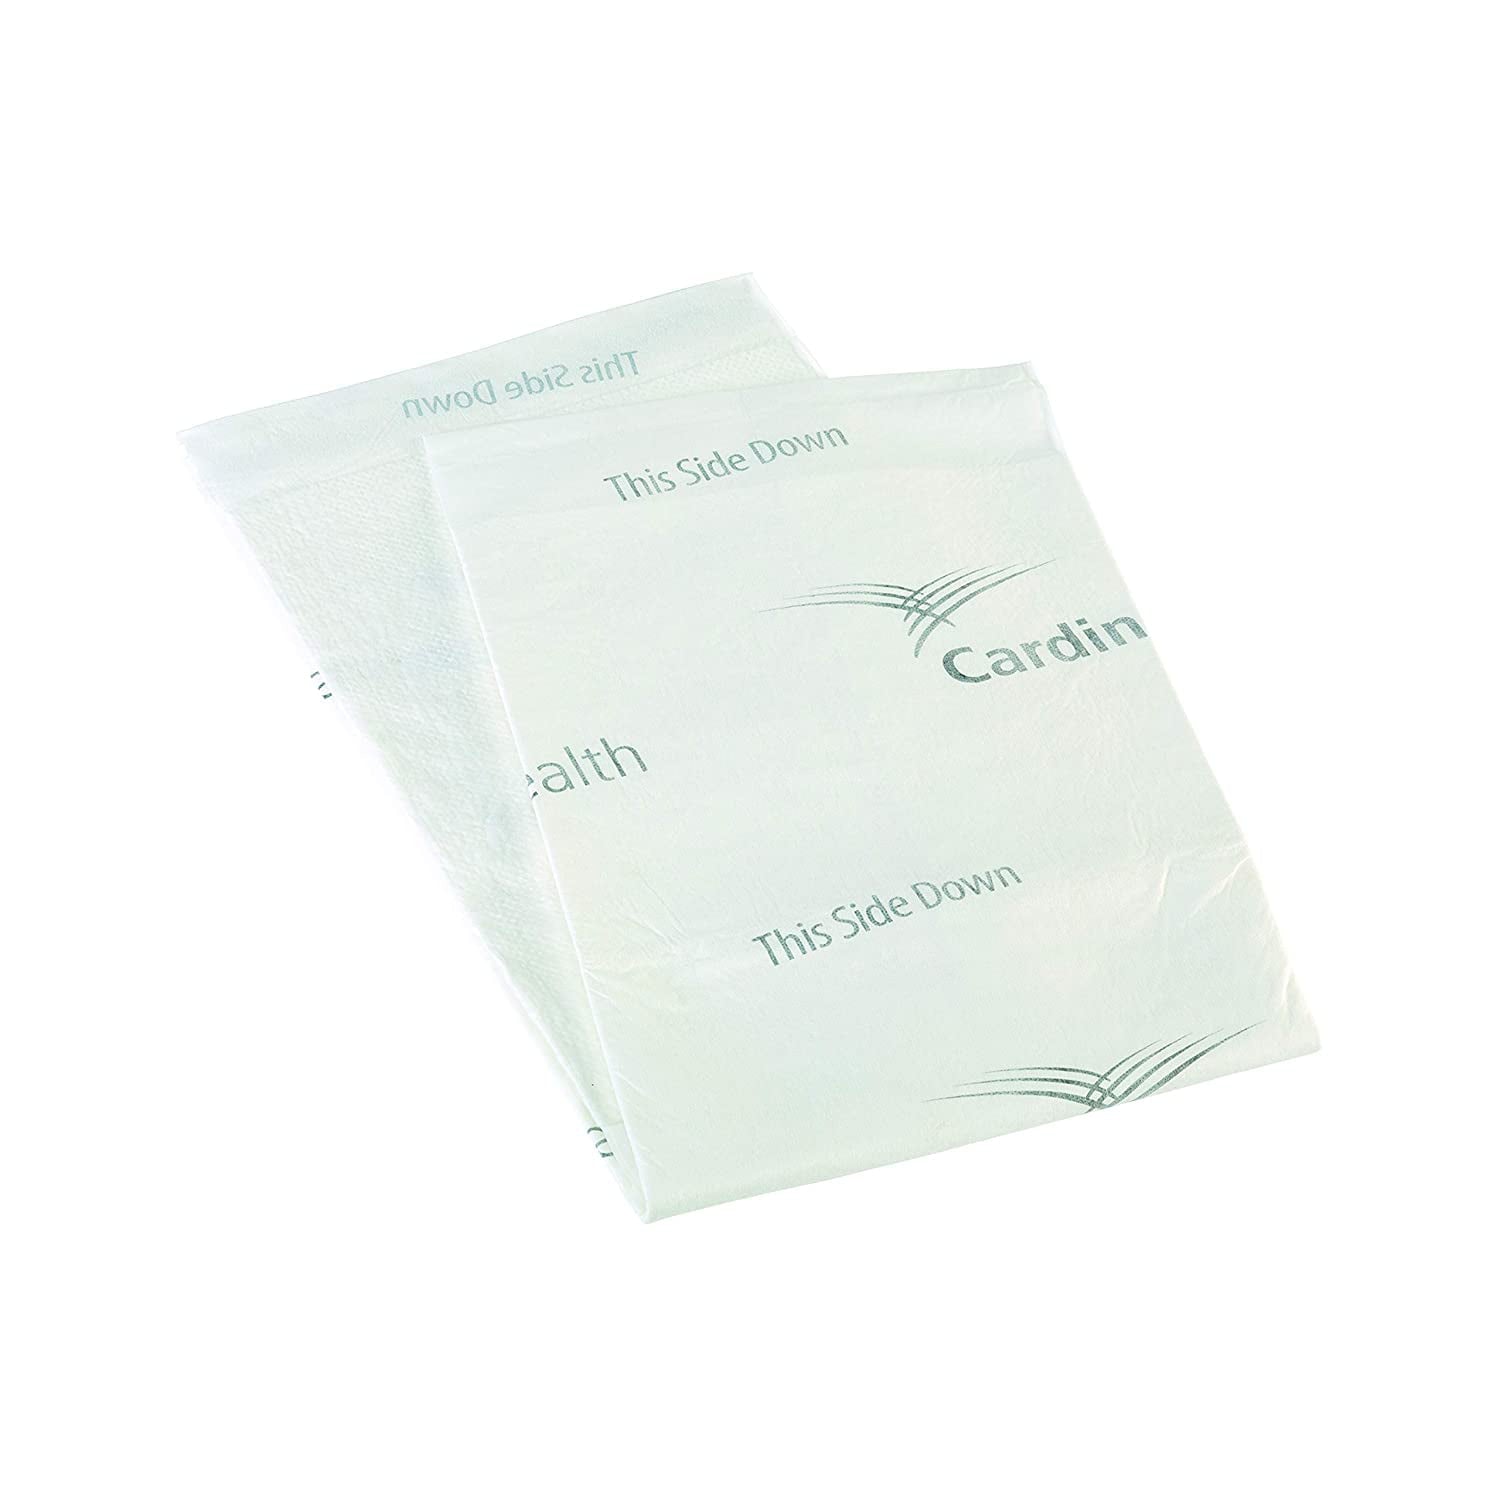  Cardinal Maximum Absorbency Protective Underwear for